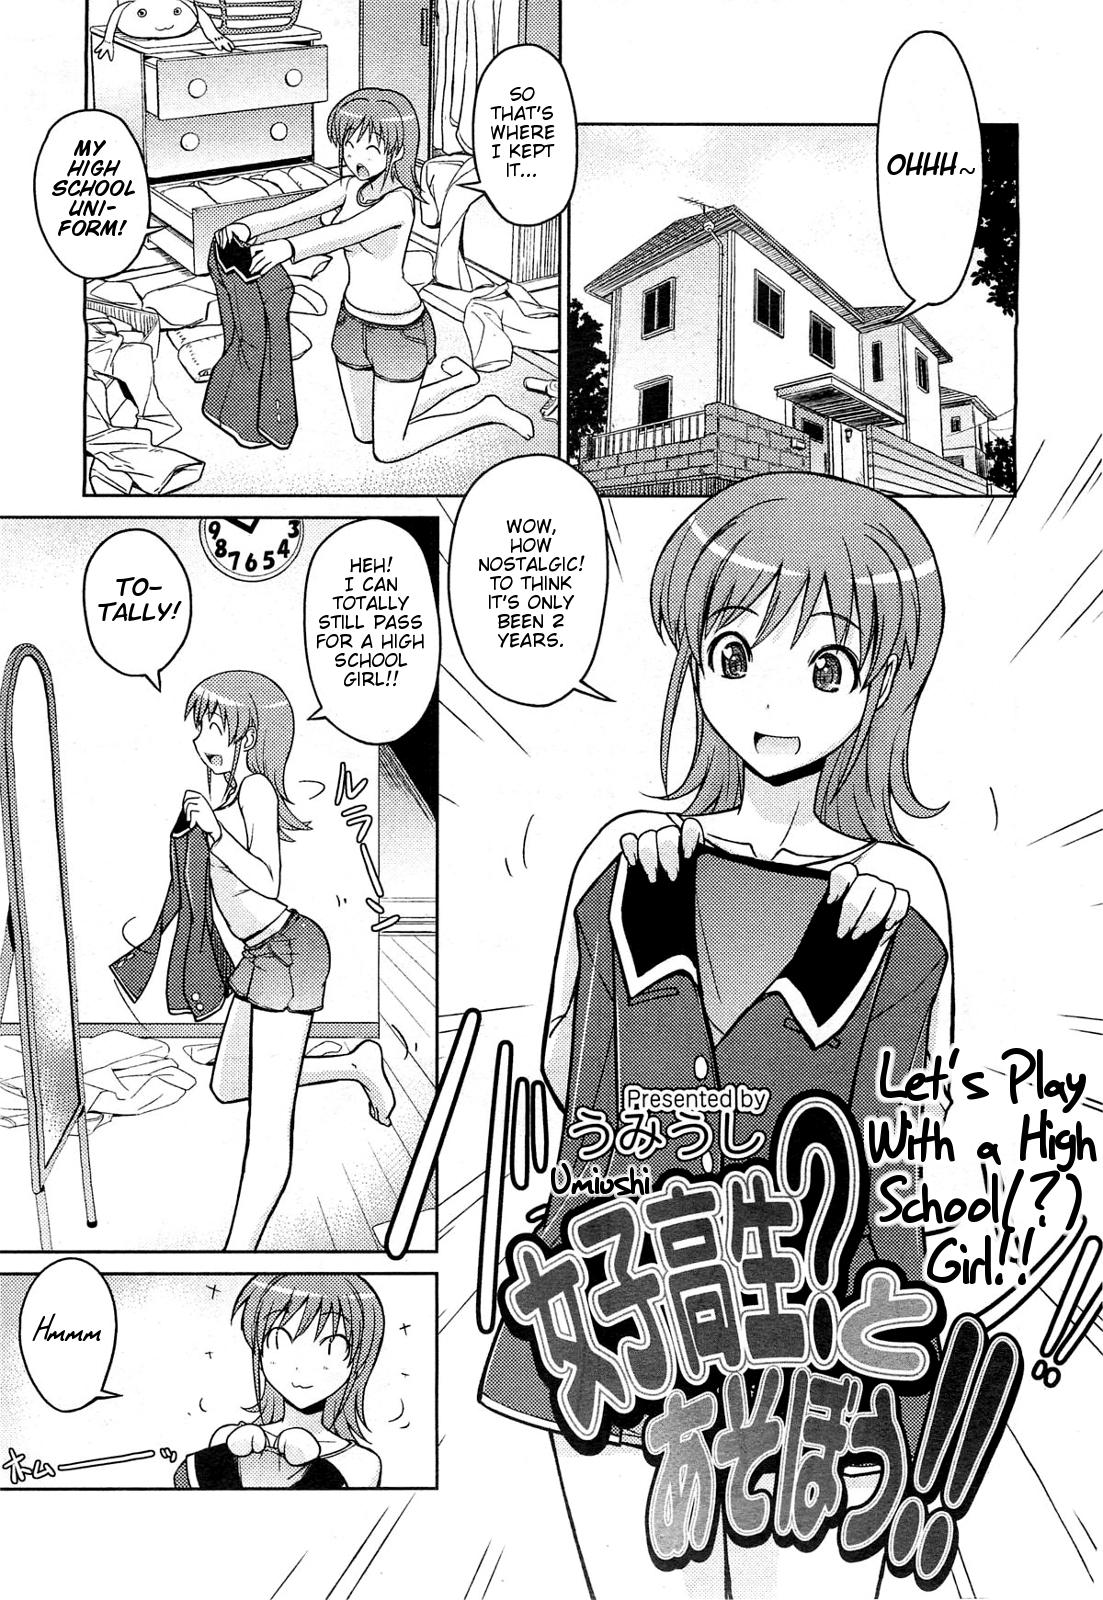 [Umiushi] Let's Play With a High School (?) Girl!! [English] =TV+L4K= 0